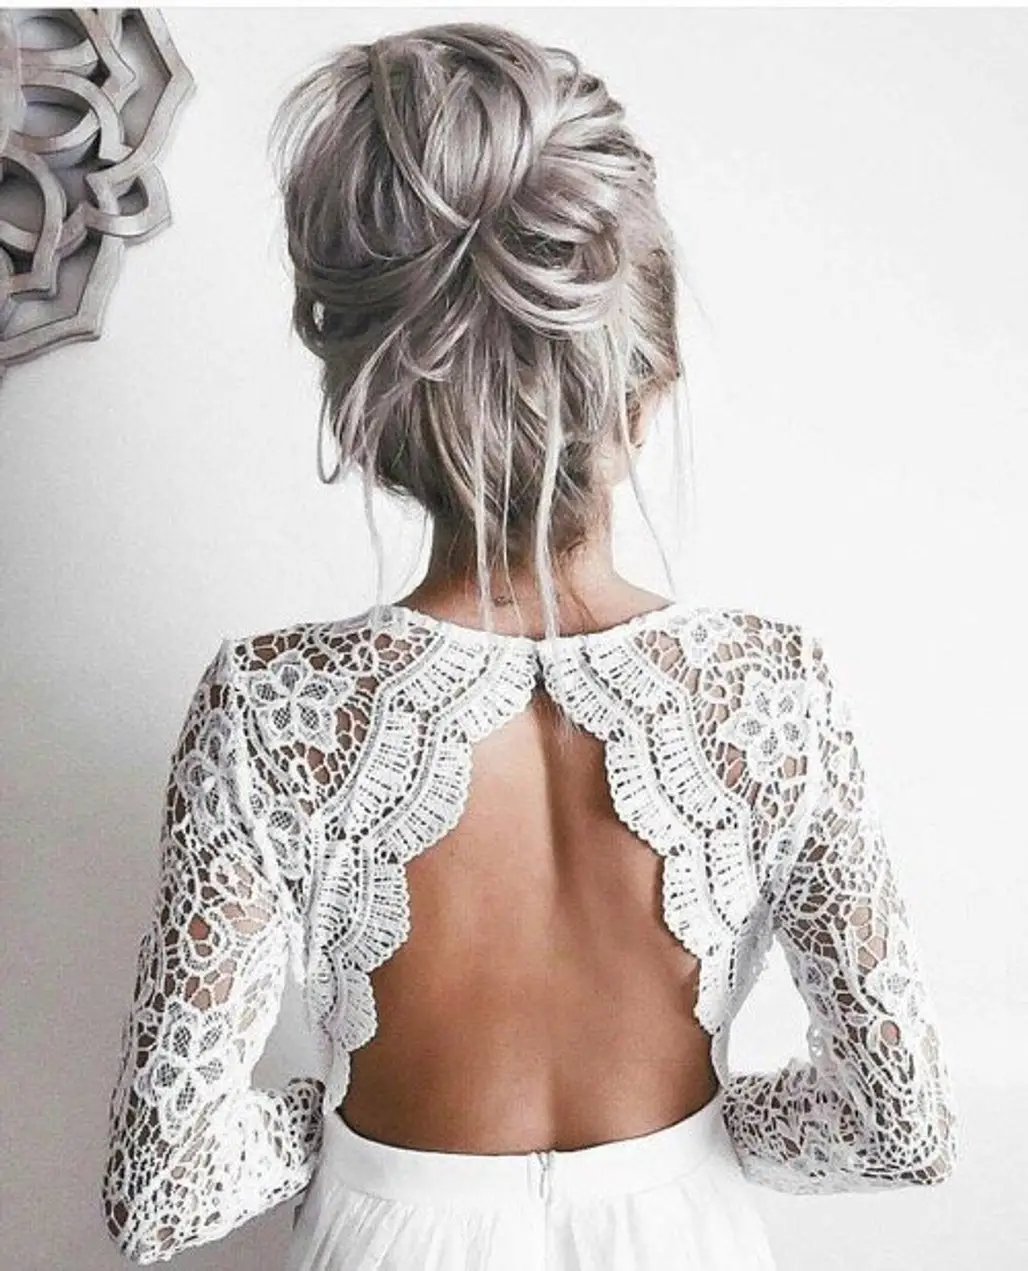 hair, clothing, hairstyle, sleeve, gown,